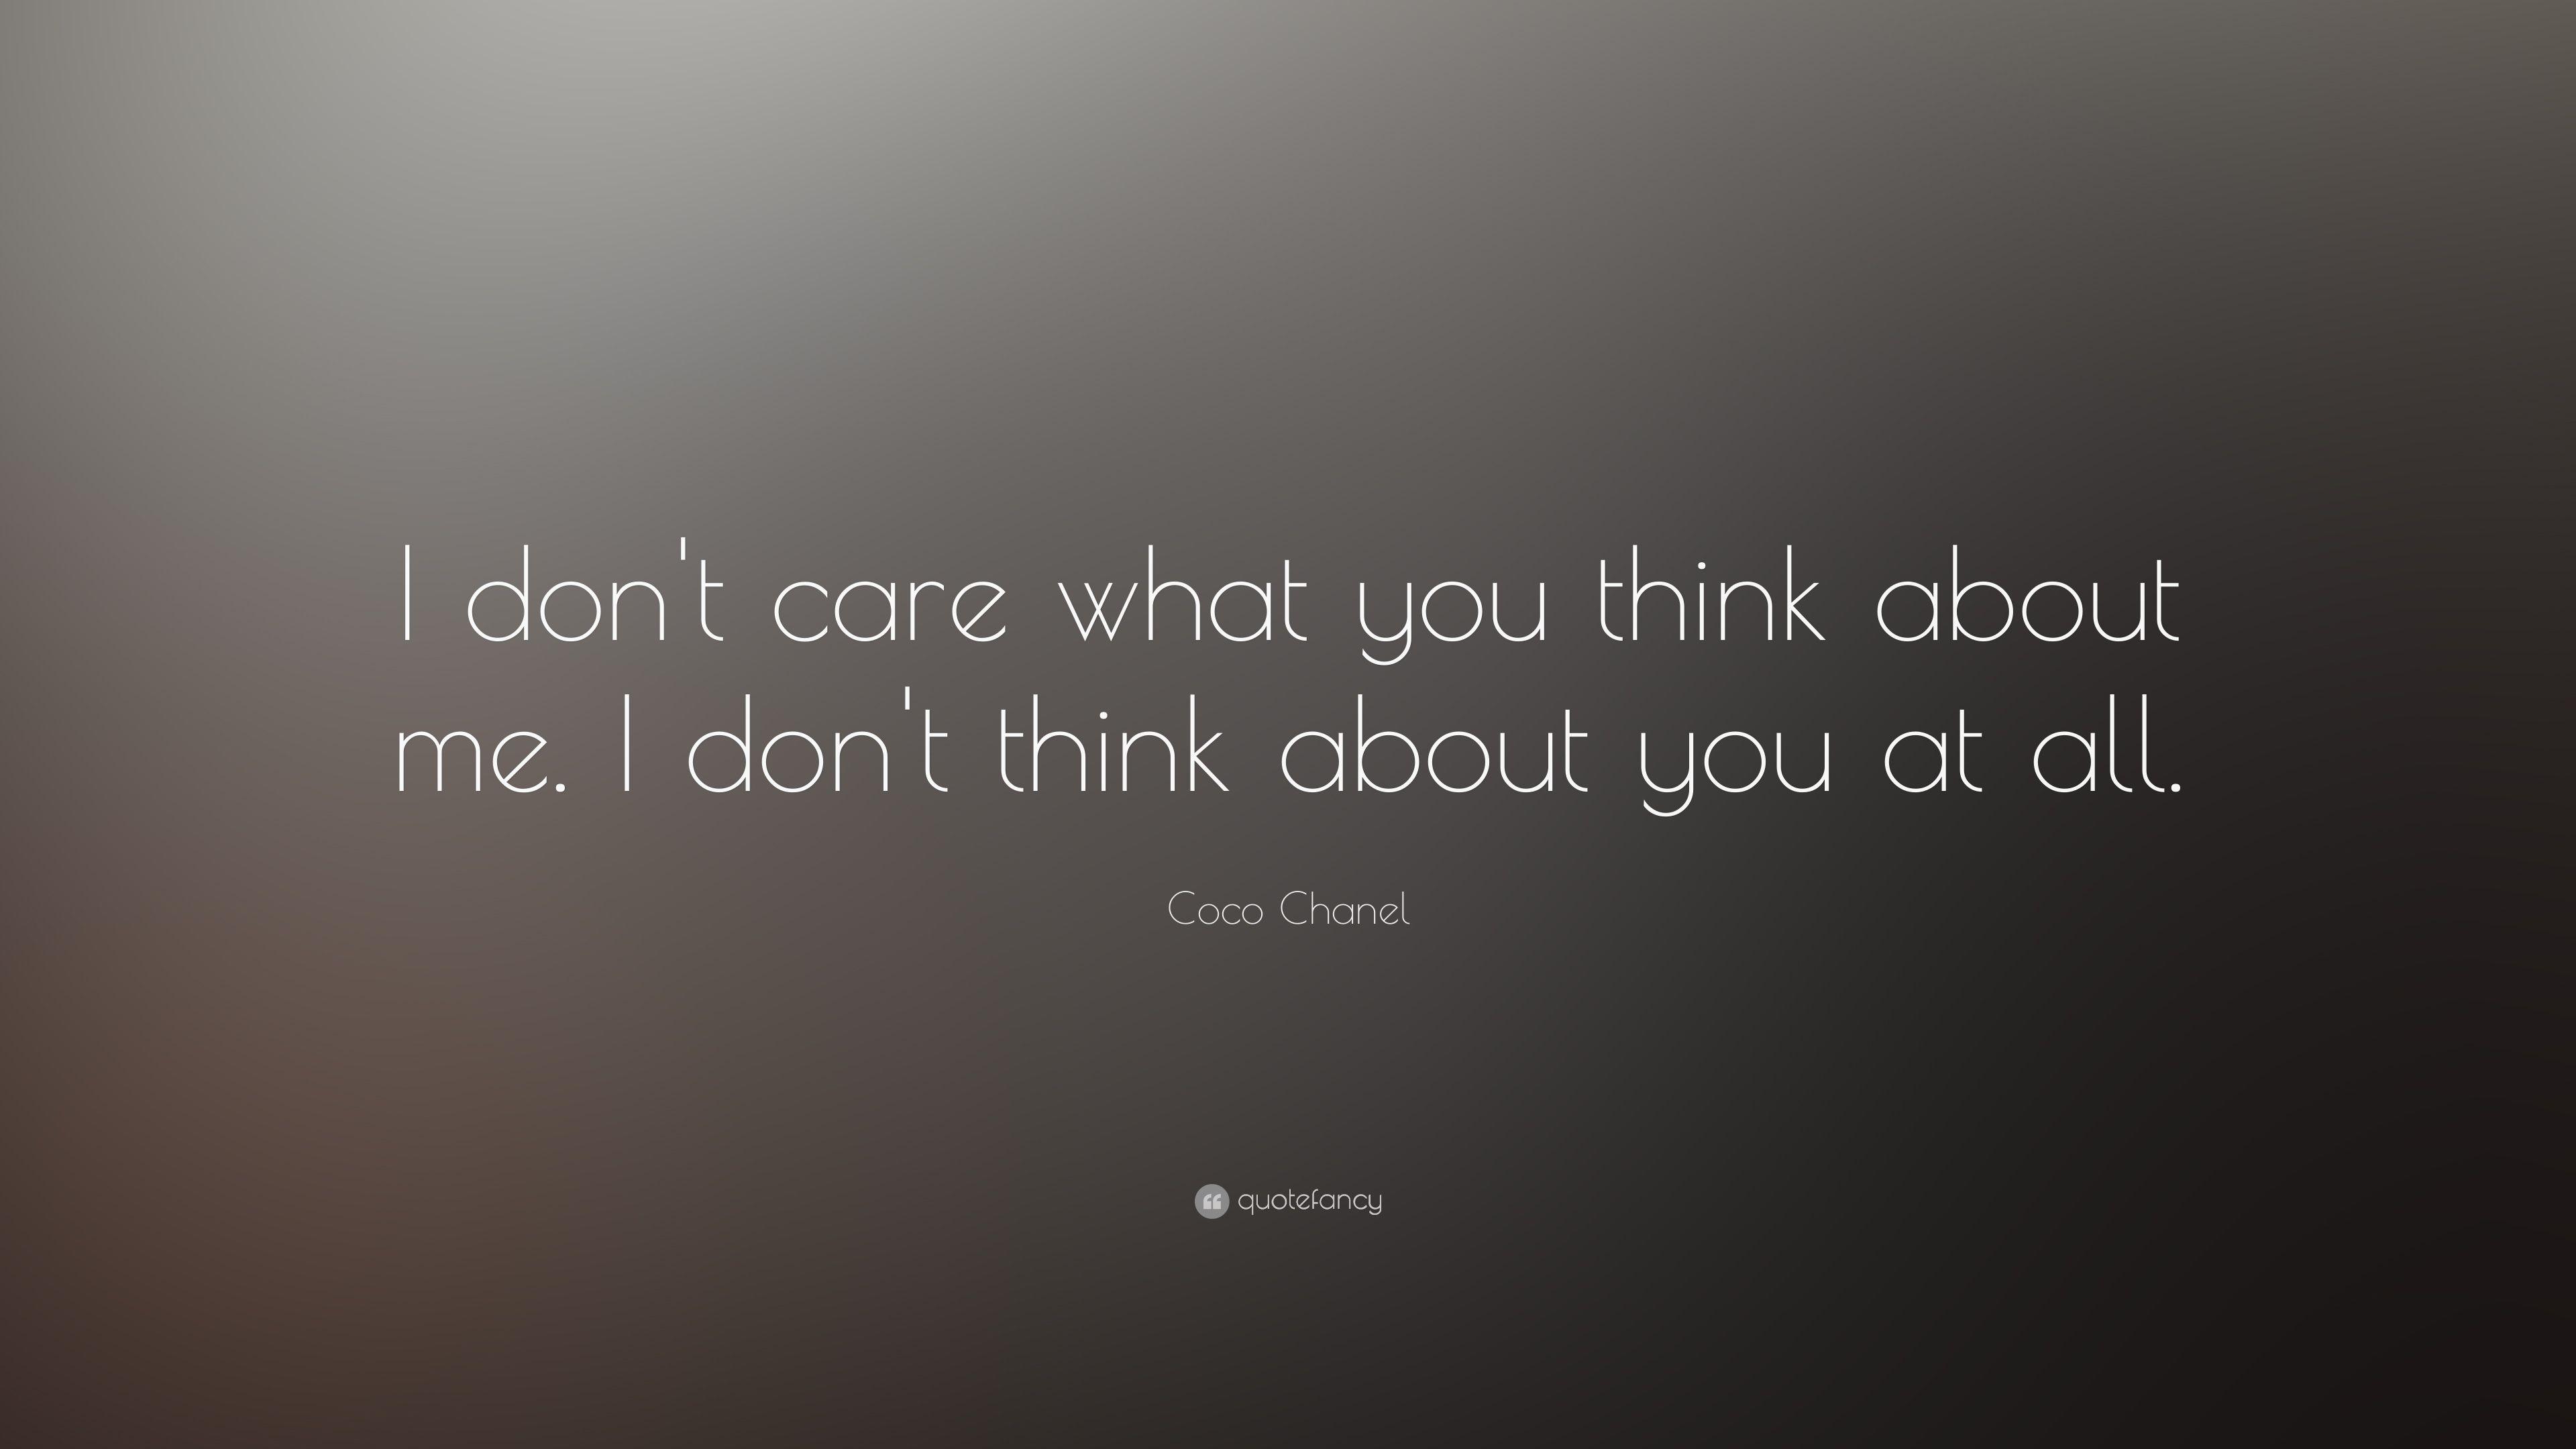 Coco Chanel Quote: “I don't care what you think about me. I don't